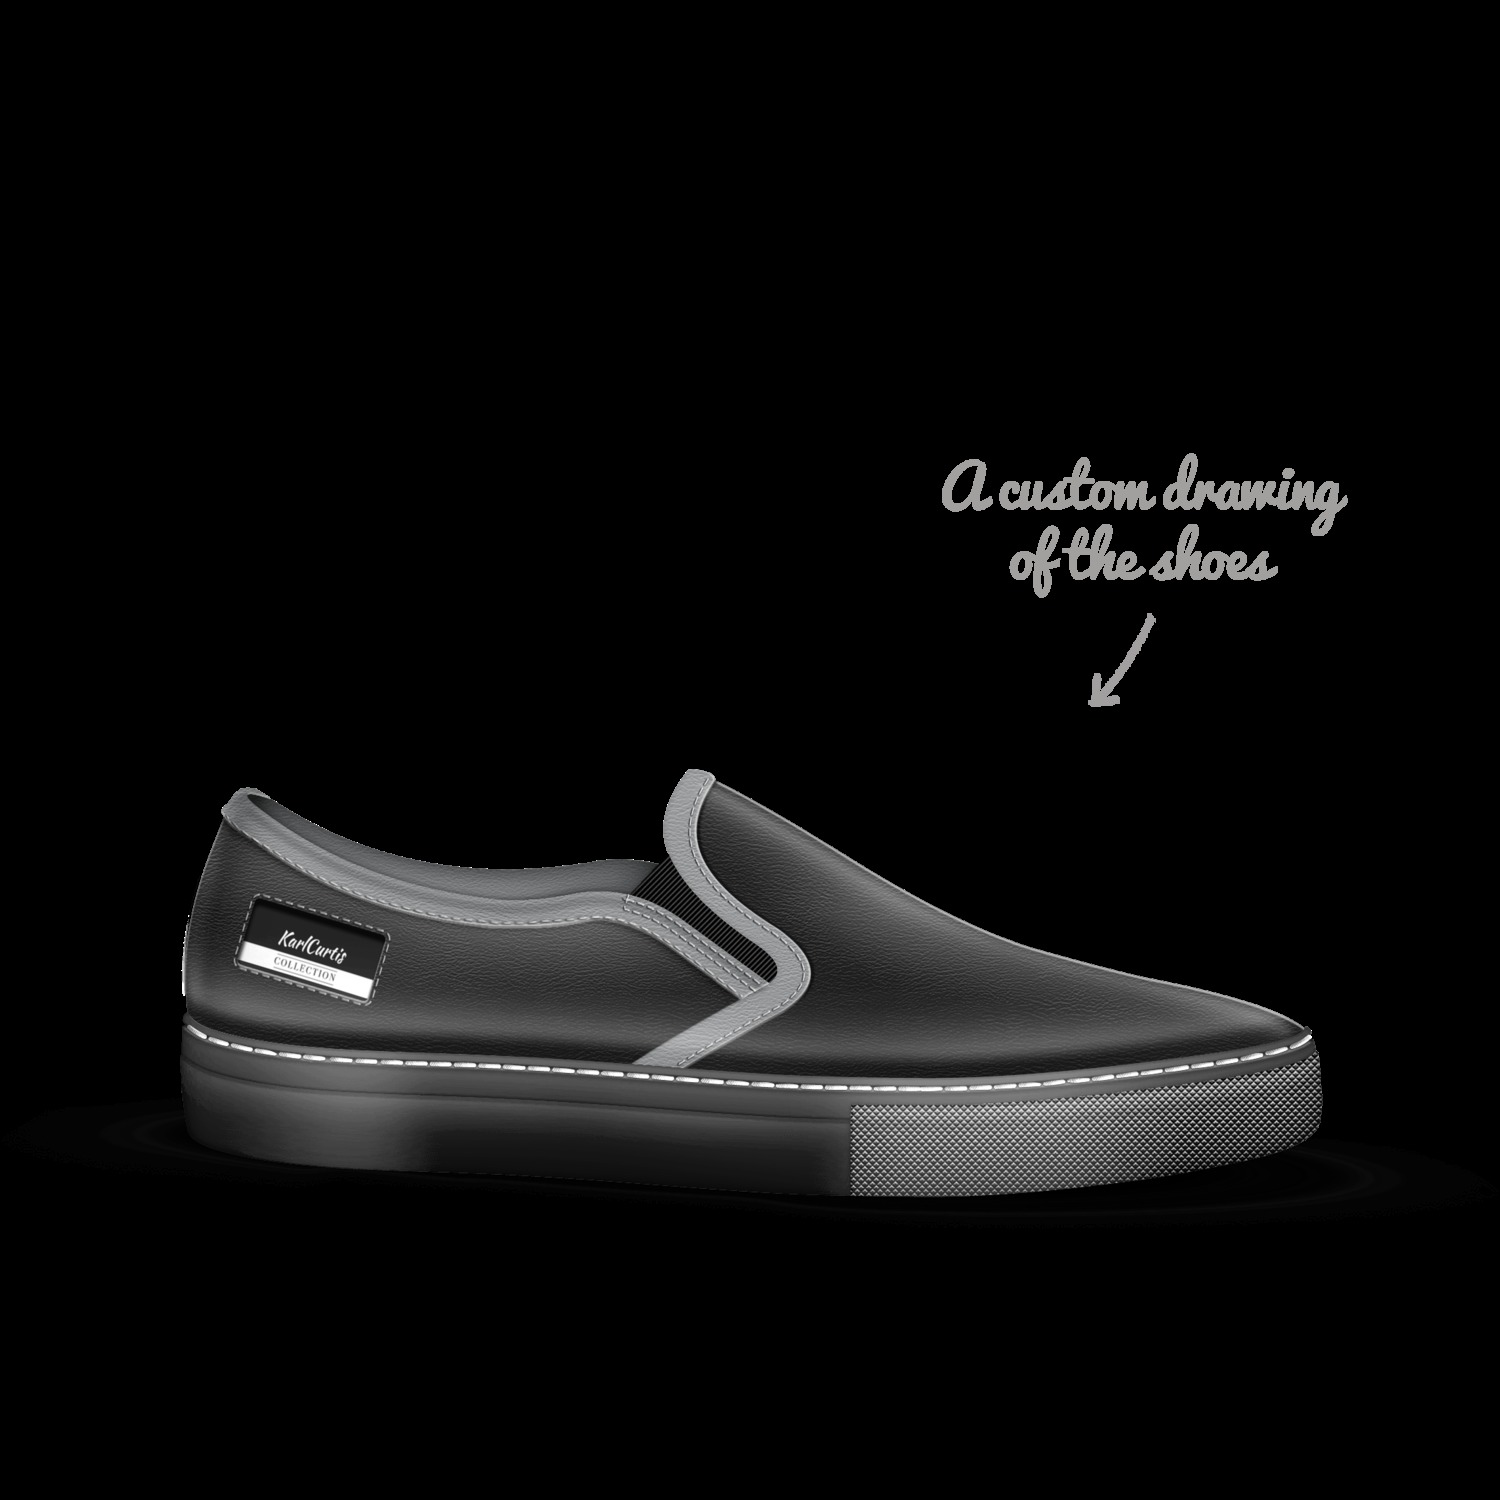 A Custom Shoe concept by Karl Hollins